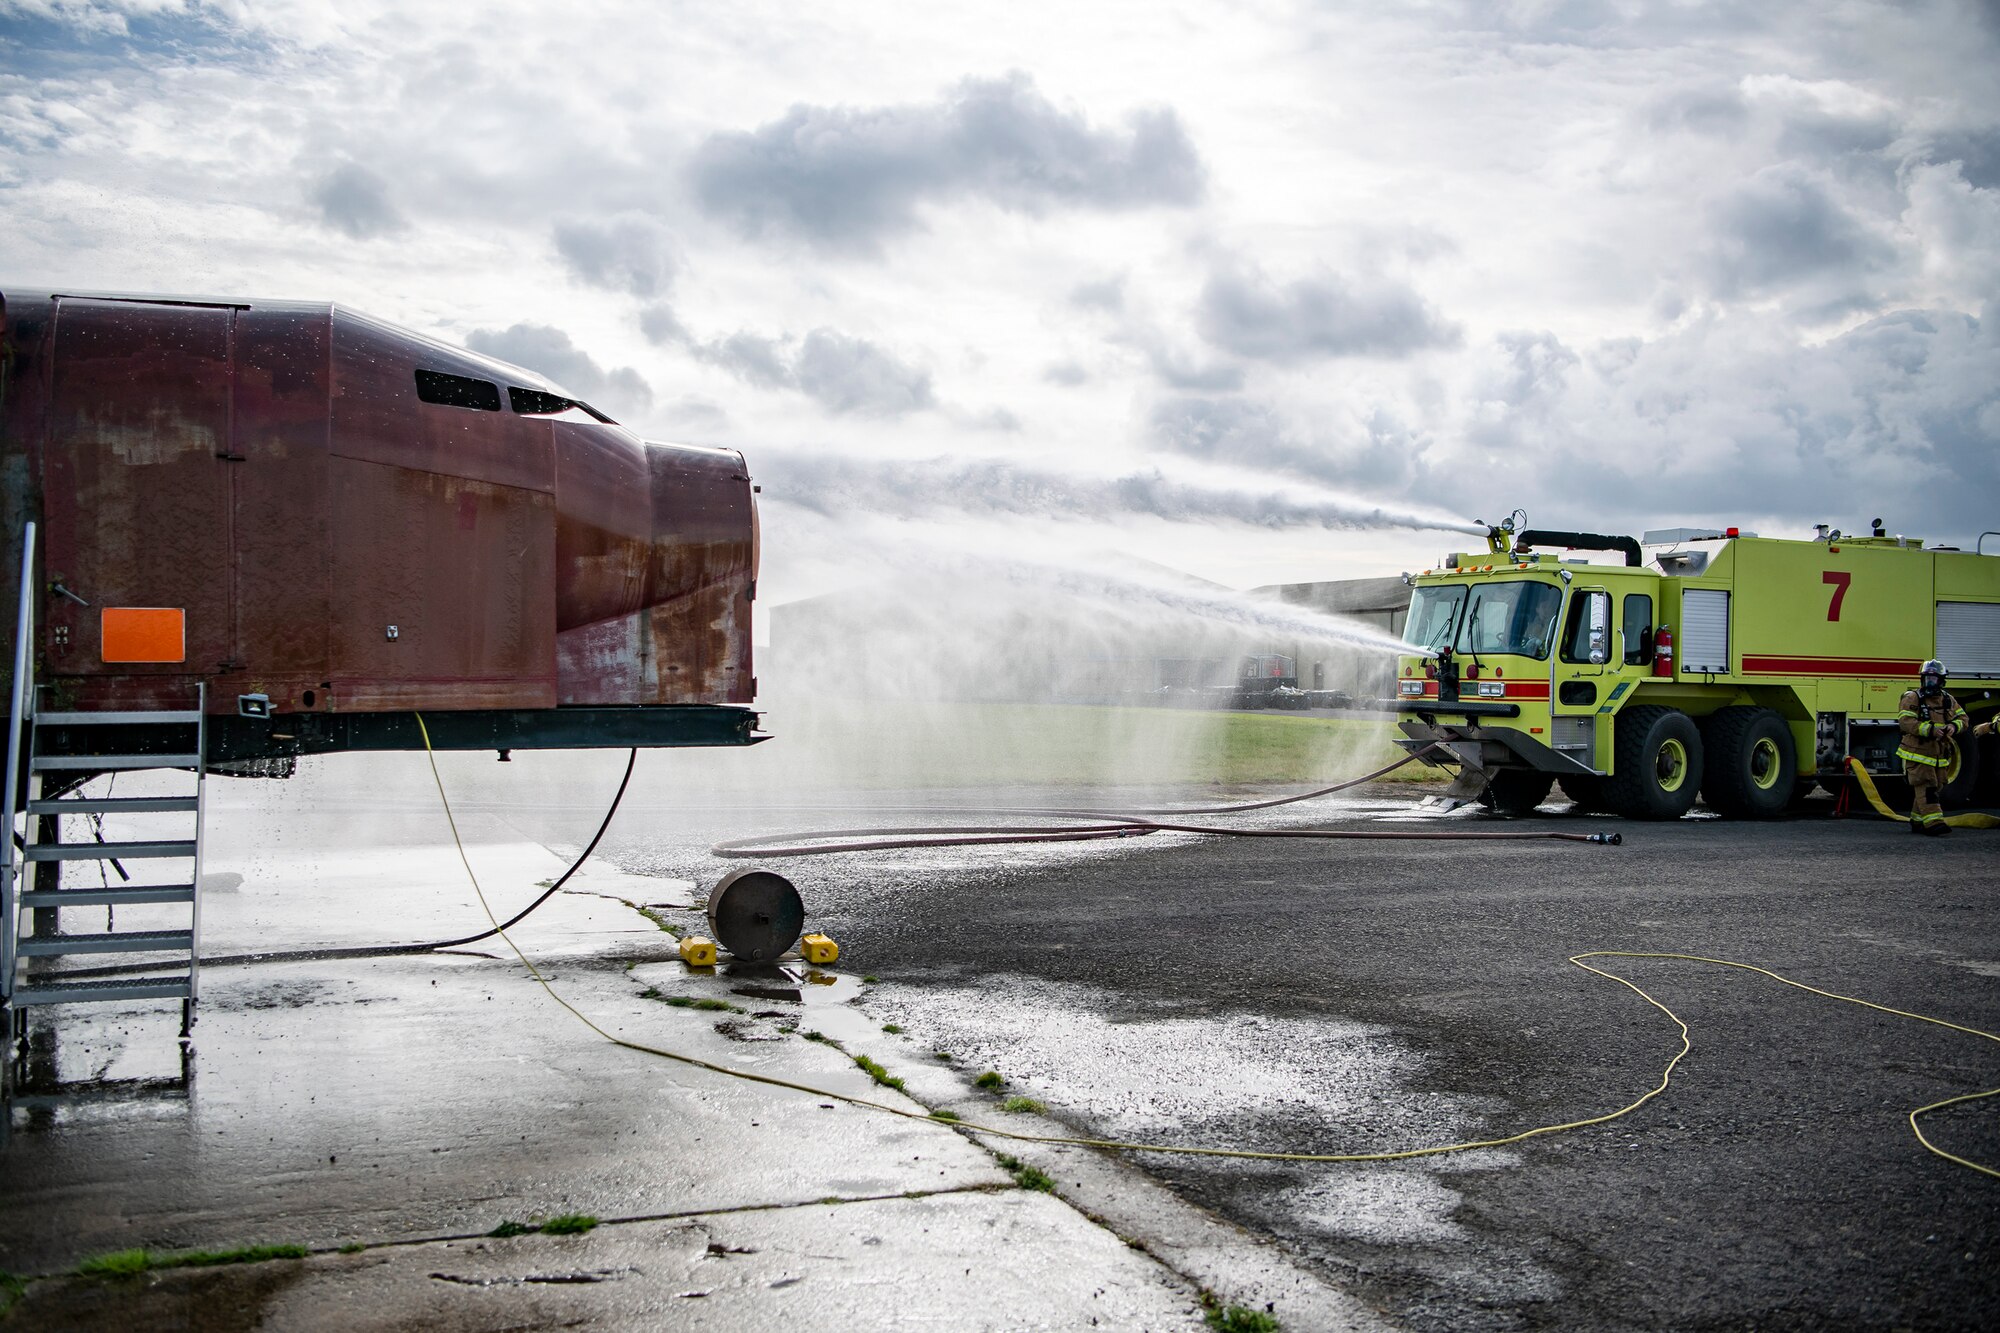 A firetruck from the 422d Fire Emergency Services extinguishes an aircraft fire during  a live-fire training exercise at RAF Fairford, England, Oct. 3, 2022. Firefighters from the 422d FES, are required to complete live-fire training bi-annualy to test thief overall readiness and ability to properly extinguish an aircraft fire. (U.S. Air Force photo by Staff Sgt. Eugene Oliver)